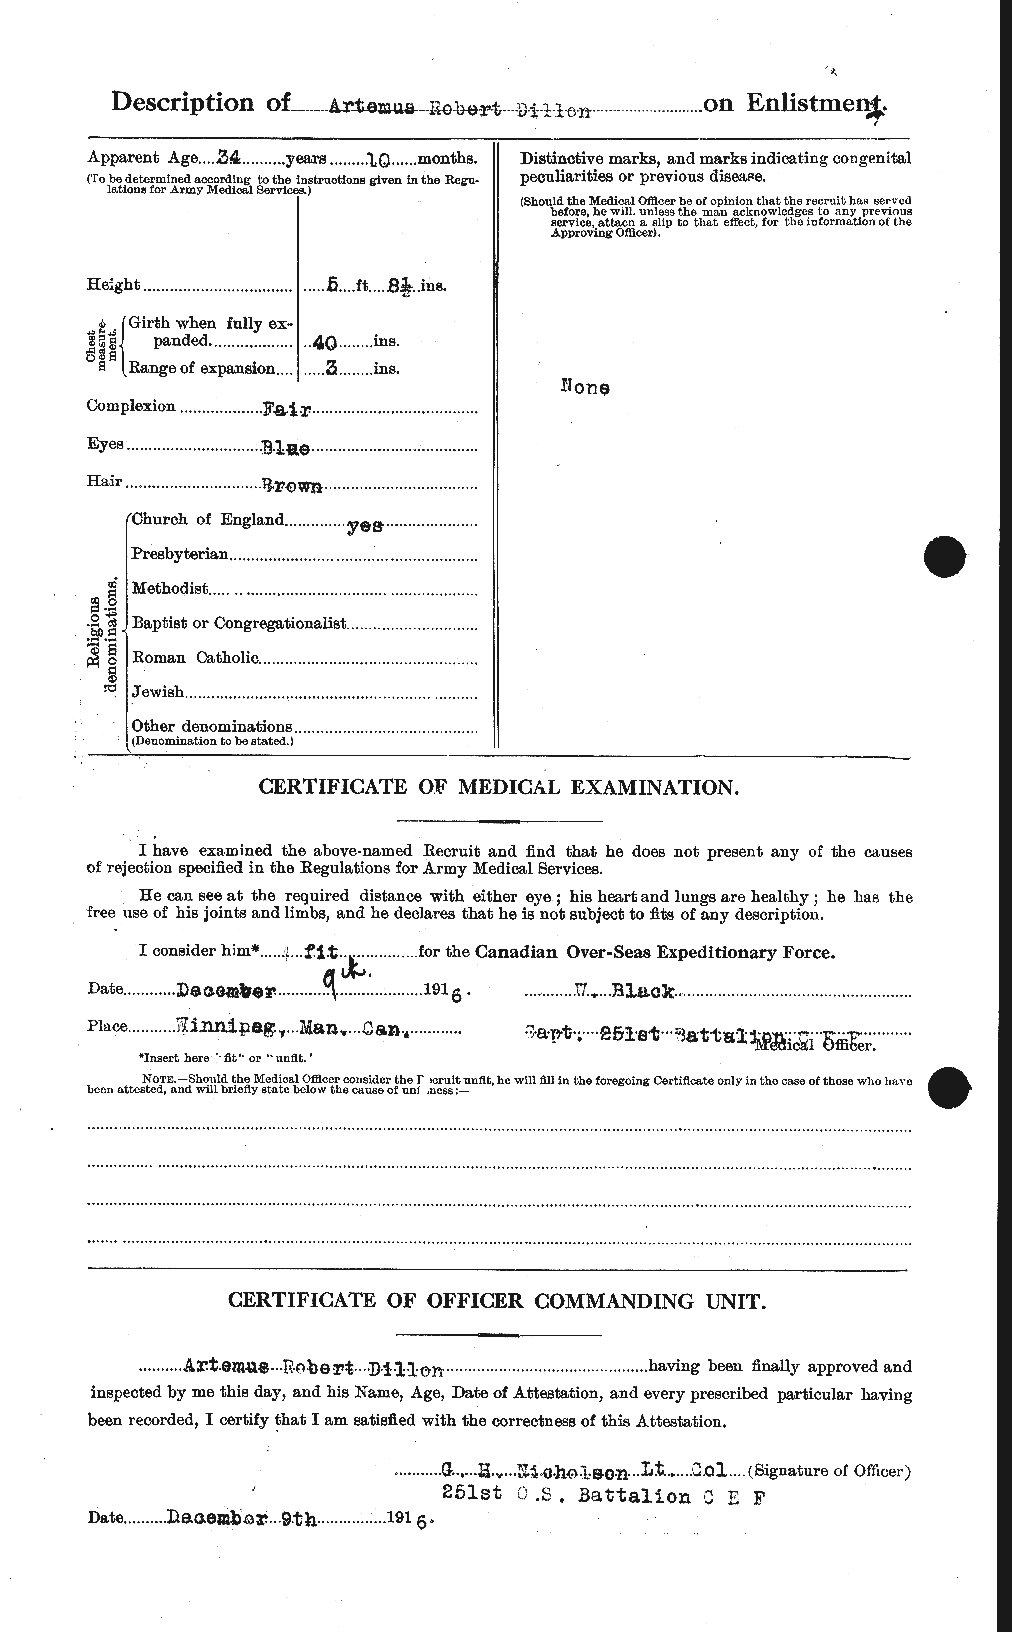 Personnel Records of the First World War - CEF 293650b